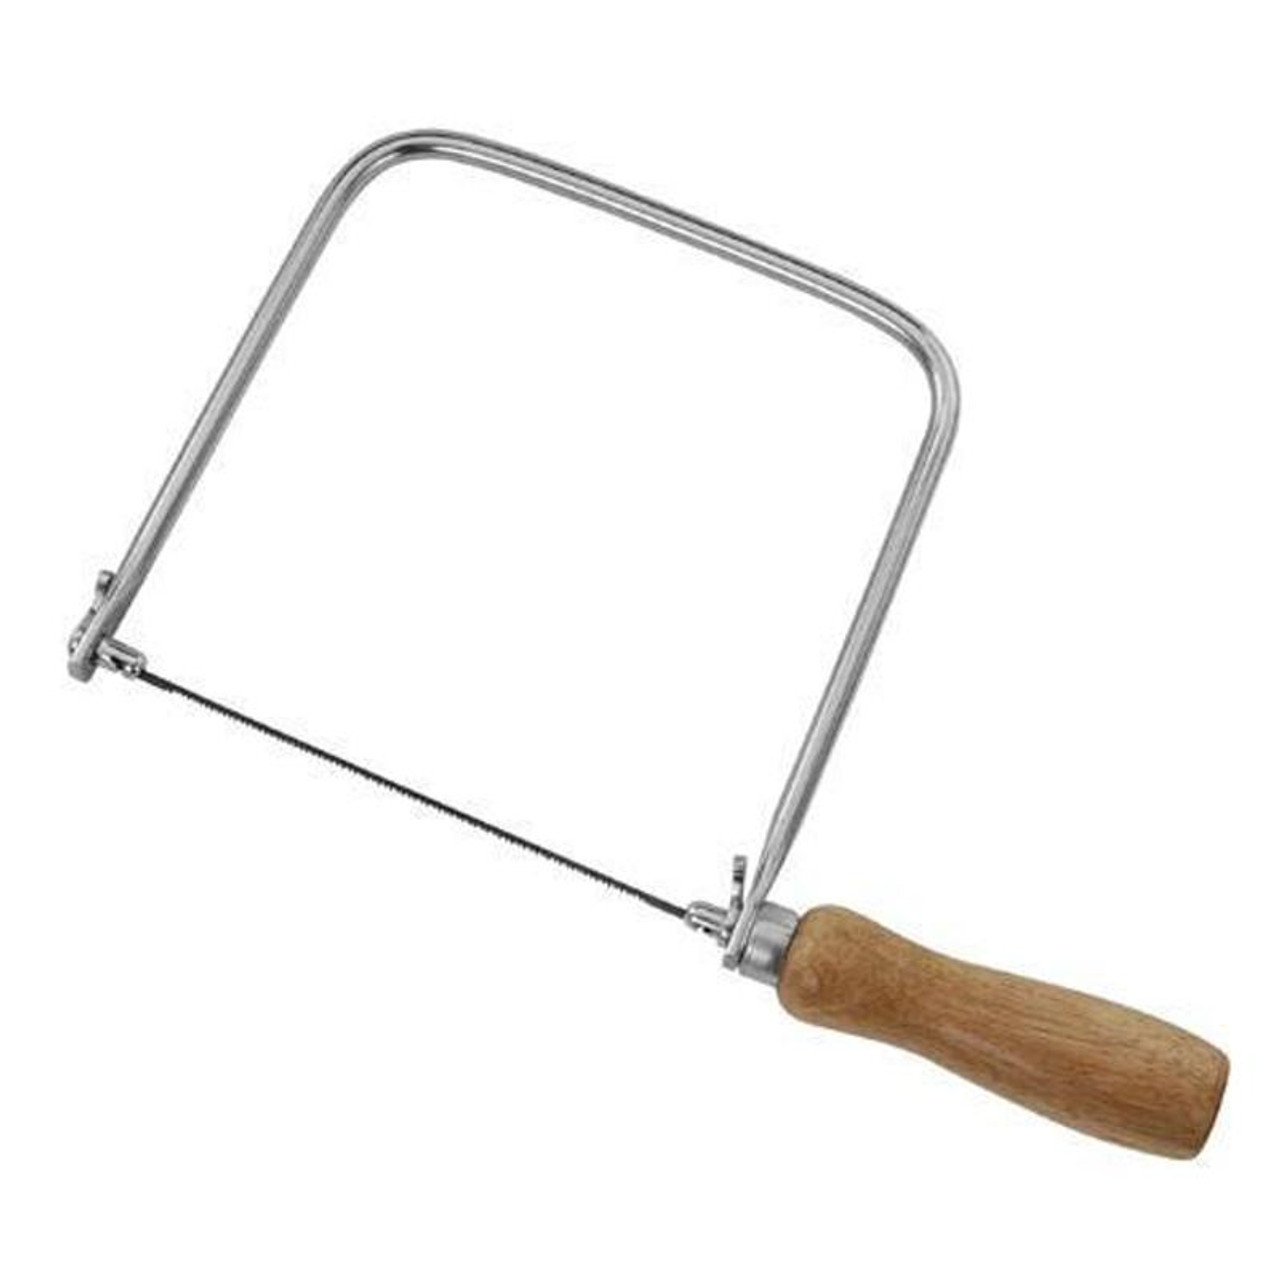 Coping Saw Blade 6-1/2 15 TPI - No. 15-061 - Whitehead Industrial